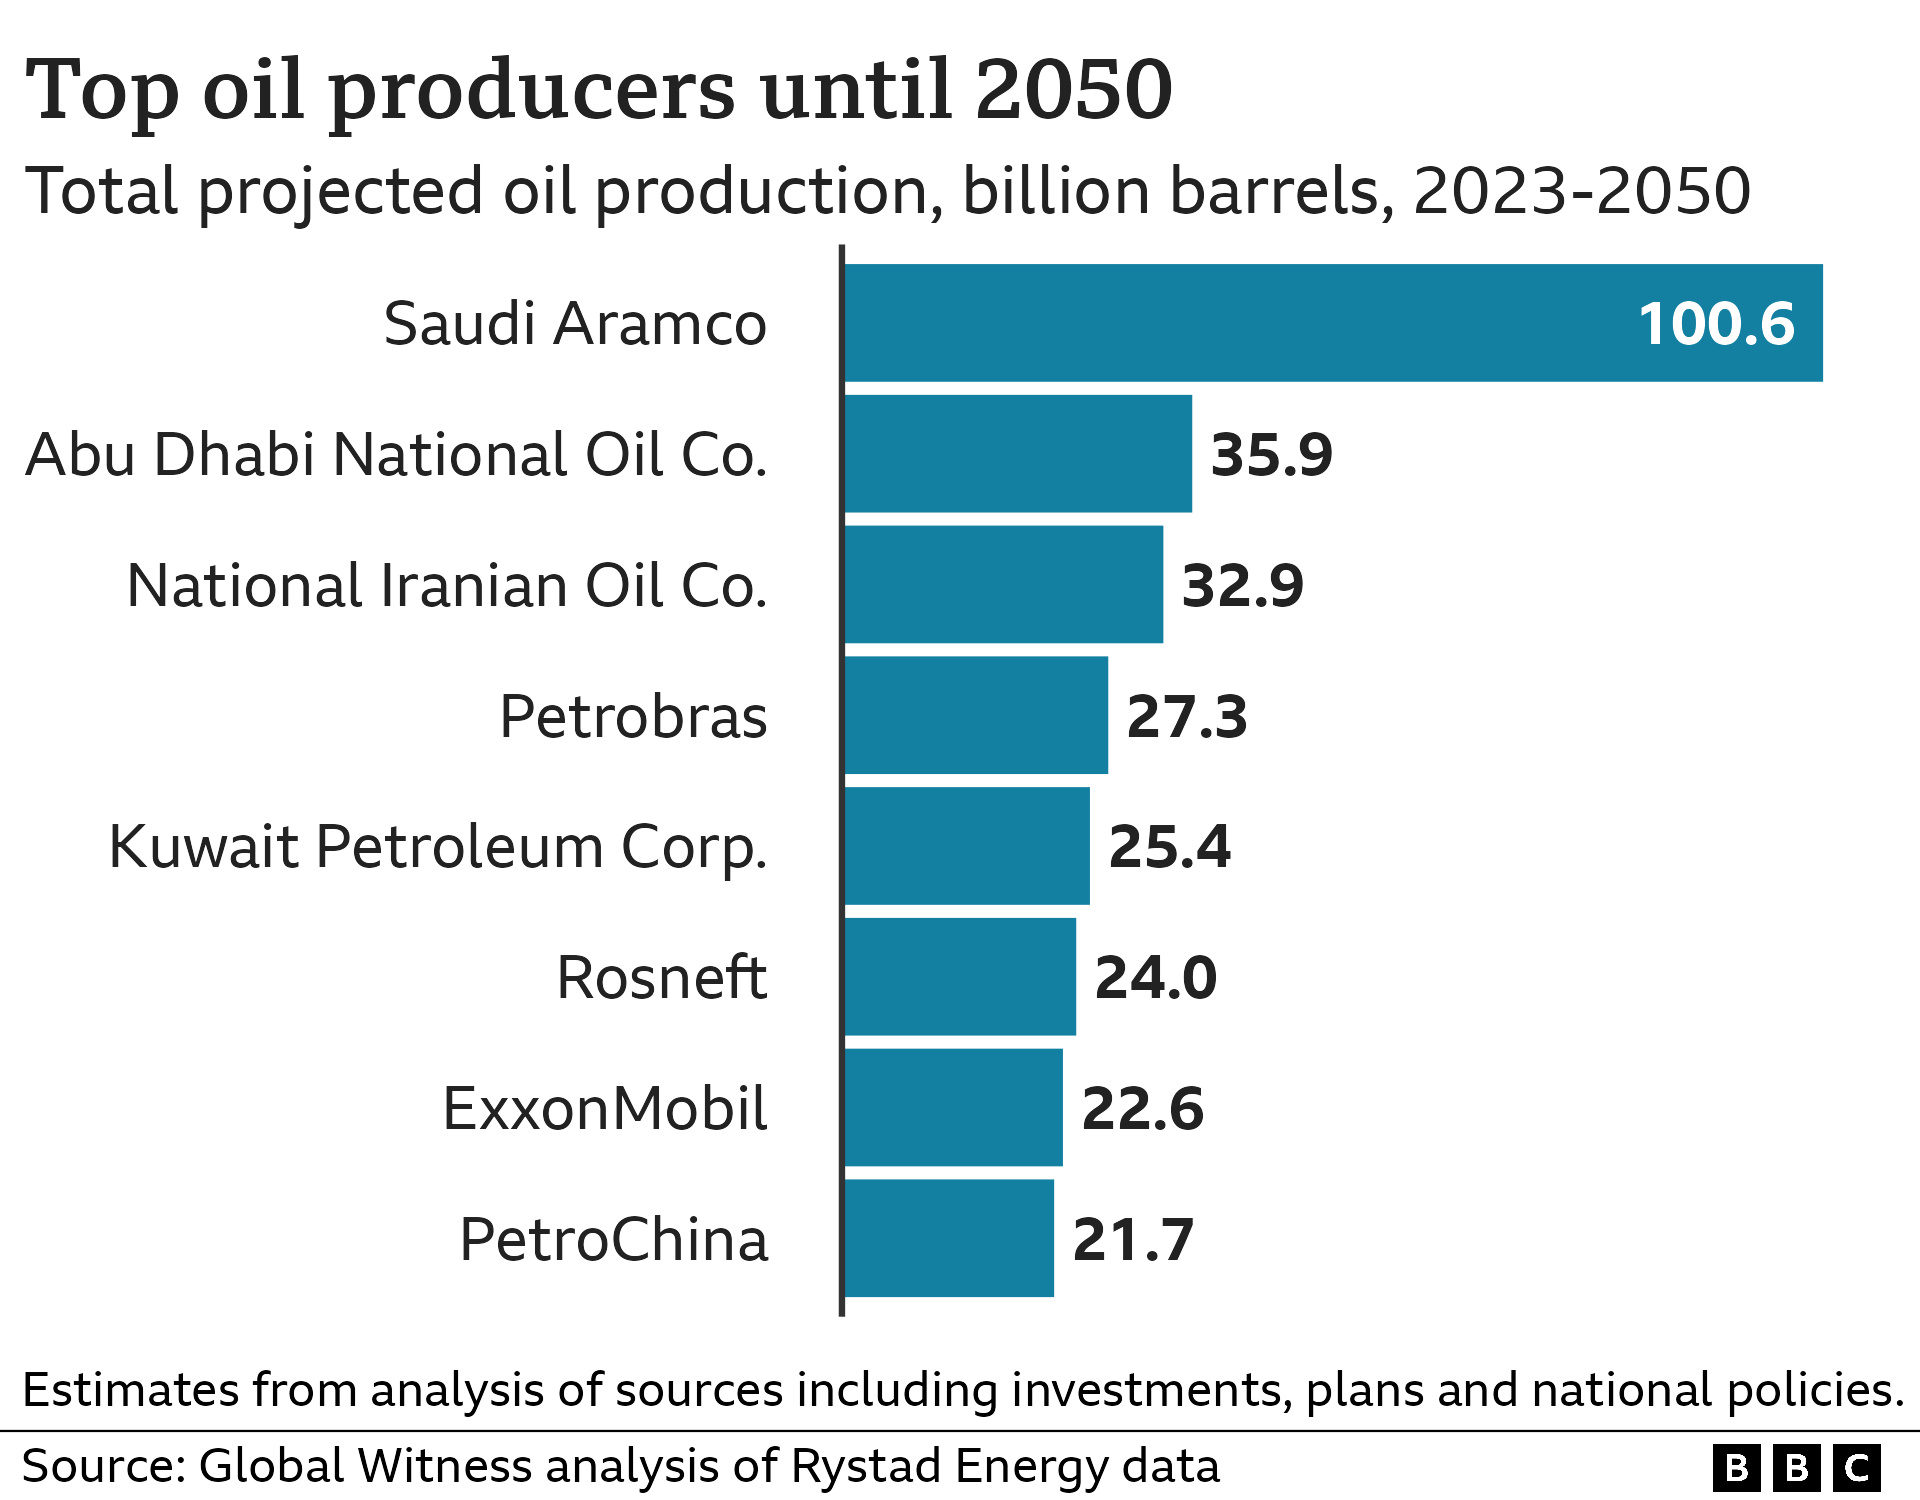 Bar chart showing total projected oil production in billion barrels between 2023-2050 for the top oil producers, according to Global Witness. The figures are Saudi Aramco (100.6), Adnoc (35.9), National Iranian Oil Company (32.9), Petrobras (27.3), KPC (25.4), Rosneft (24.0), ExxonMobil (22.6), and PetroChina (21.7).